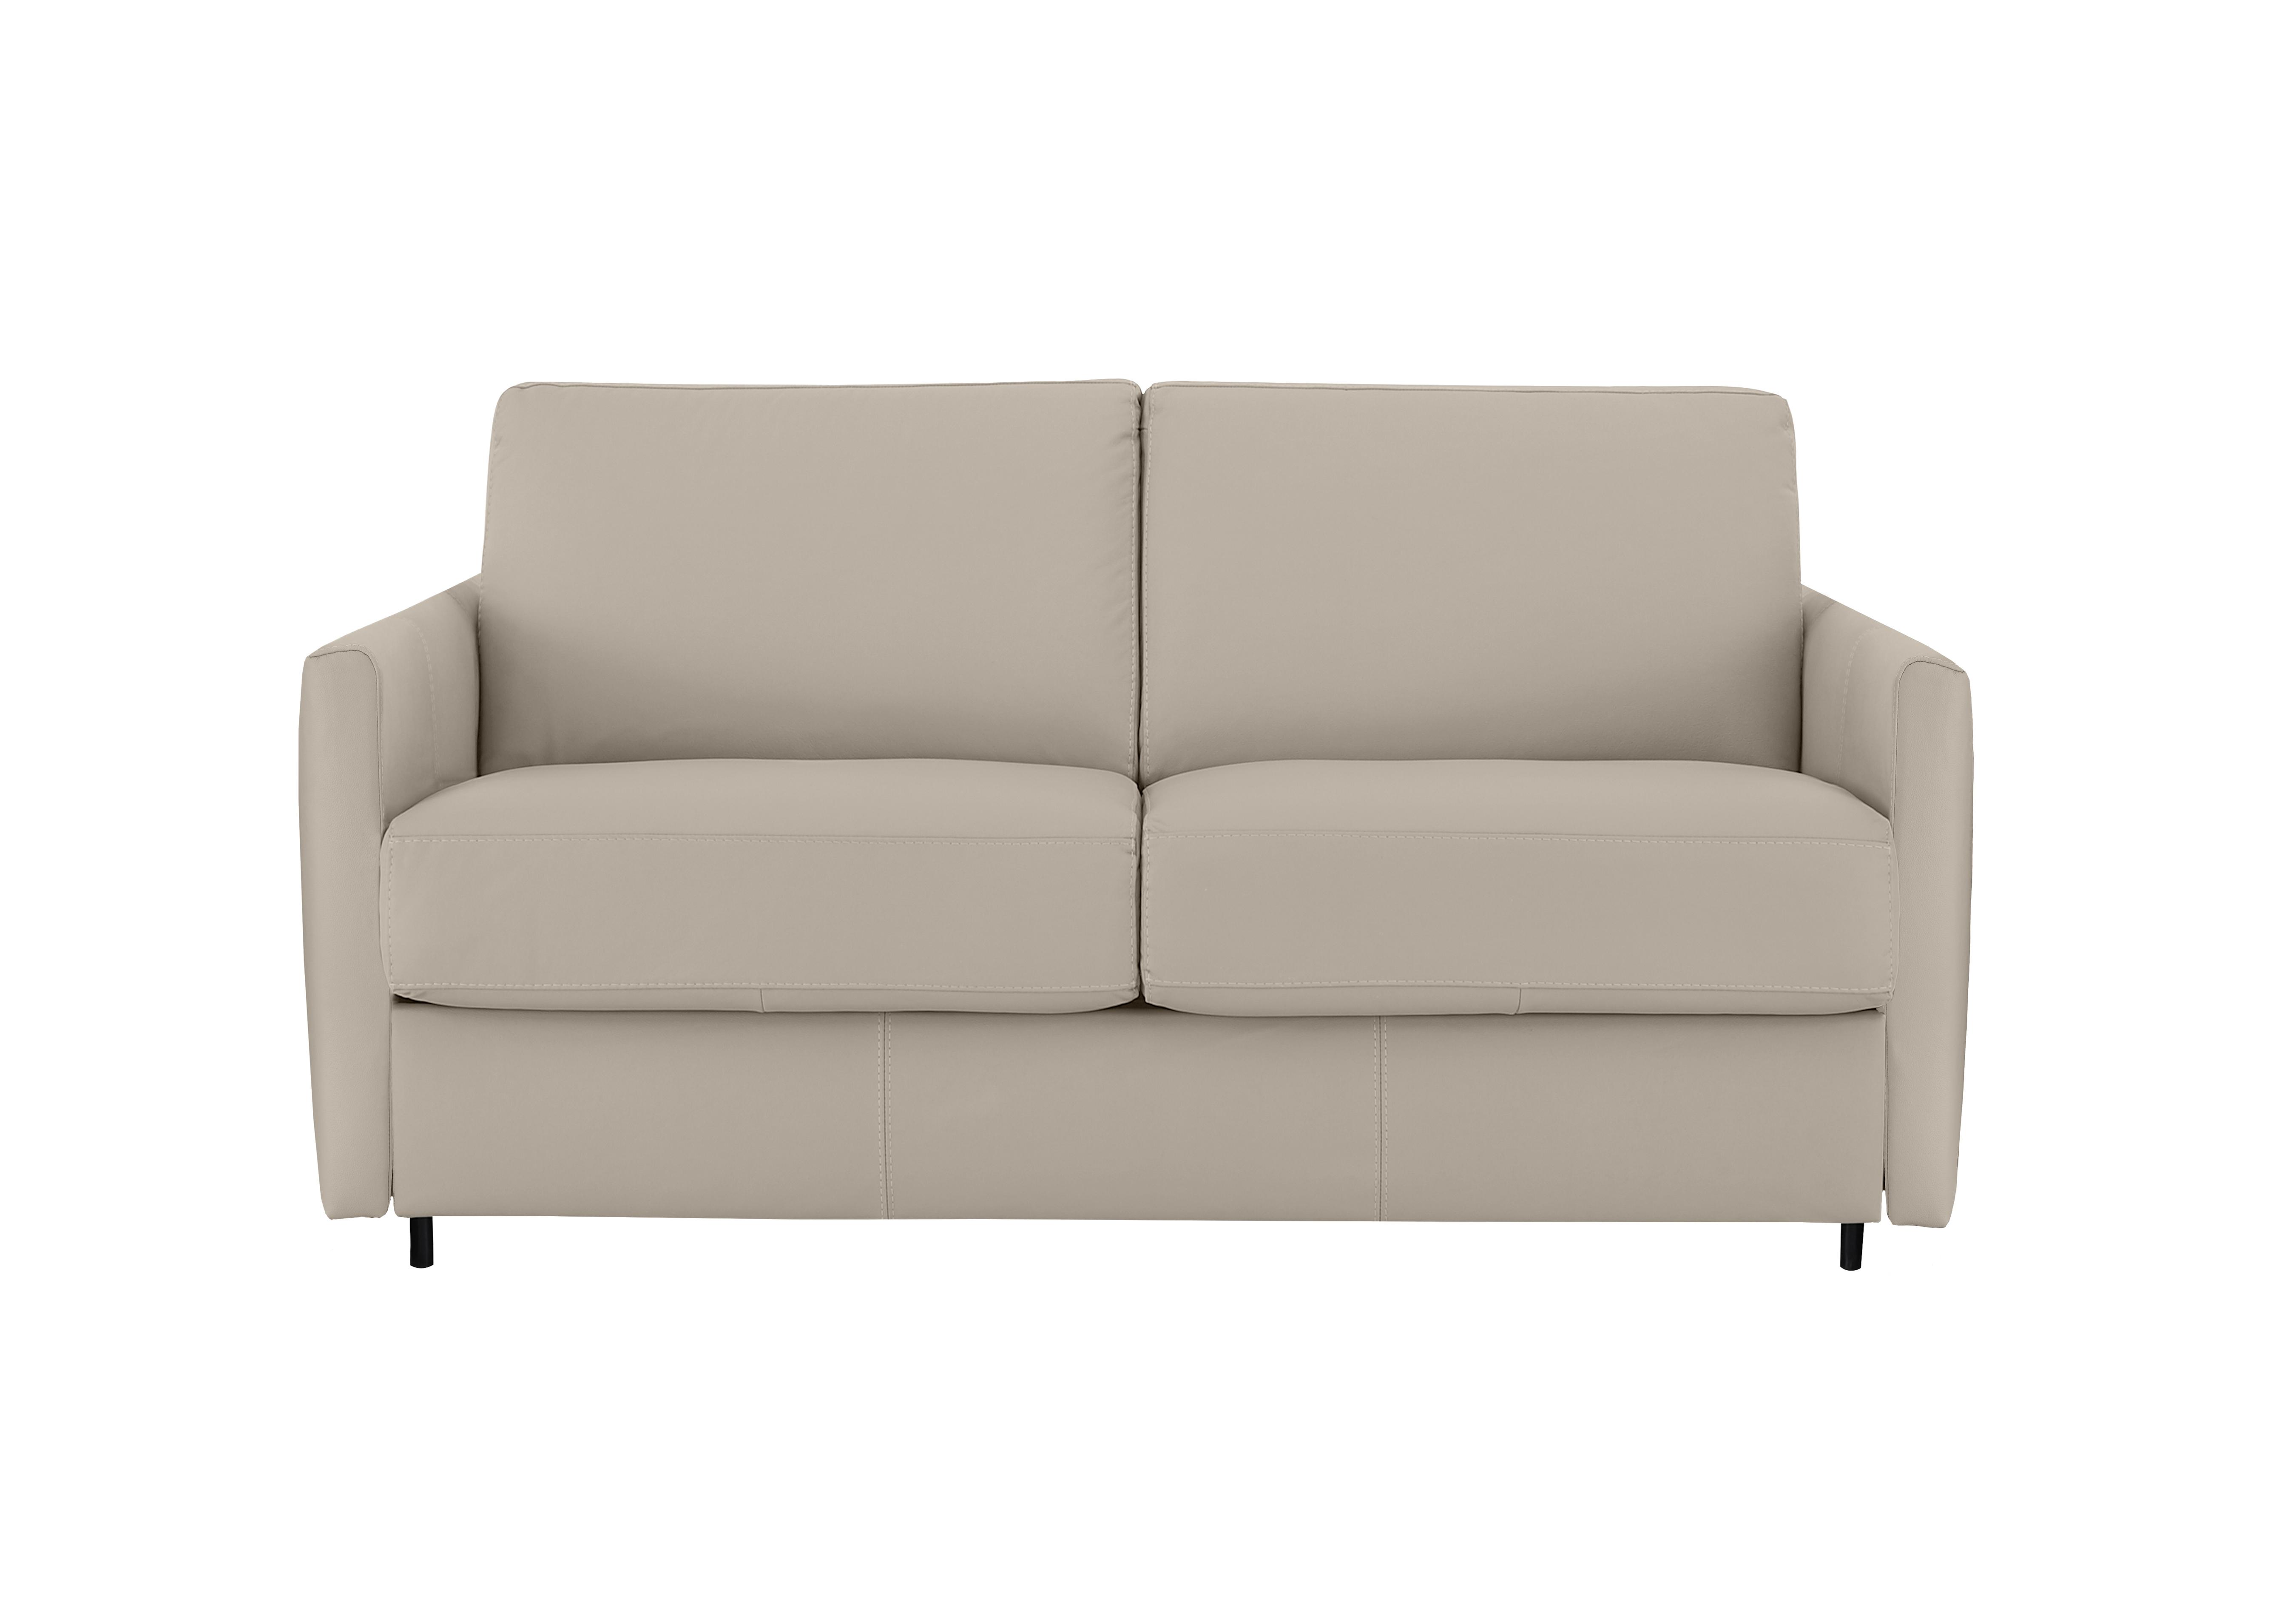 Alcova 2 Seater Leather Sofa Bed with Slim Arms in Botero Crema 2156 on Furniture Village